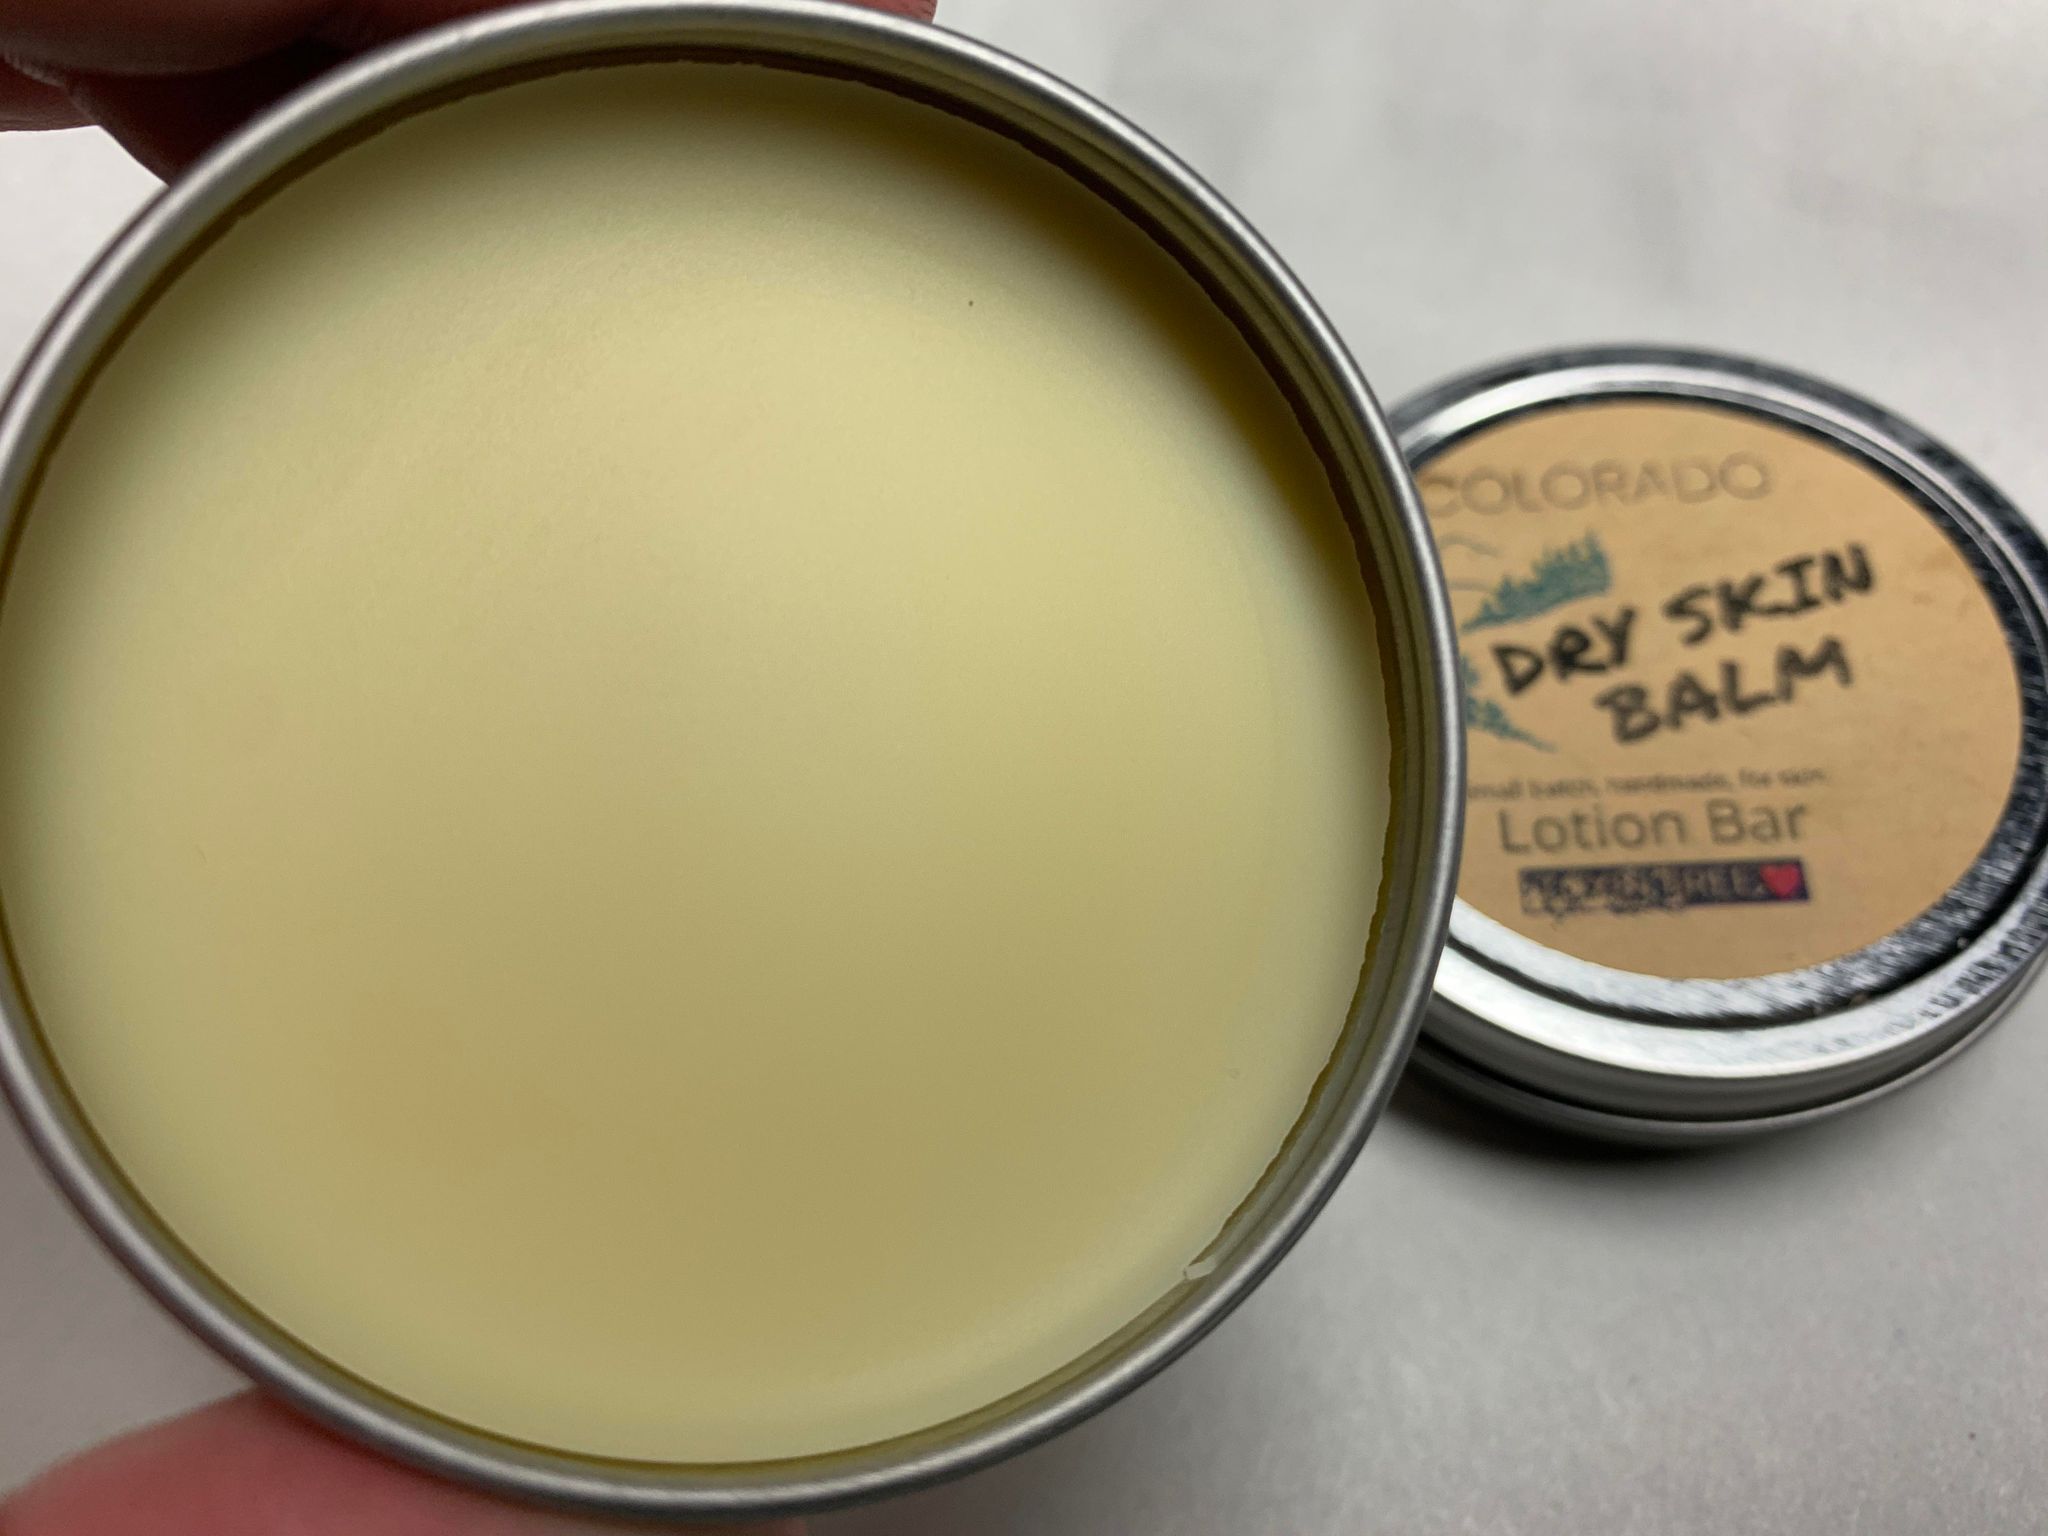 Colorado Dry Skin Balm - made in small batches